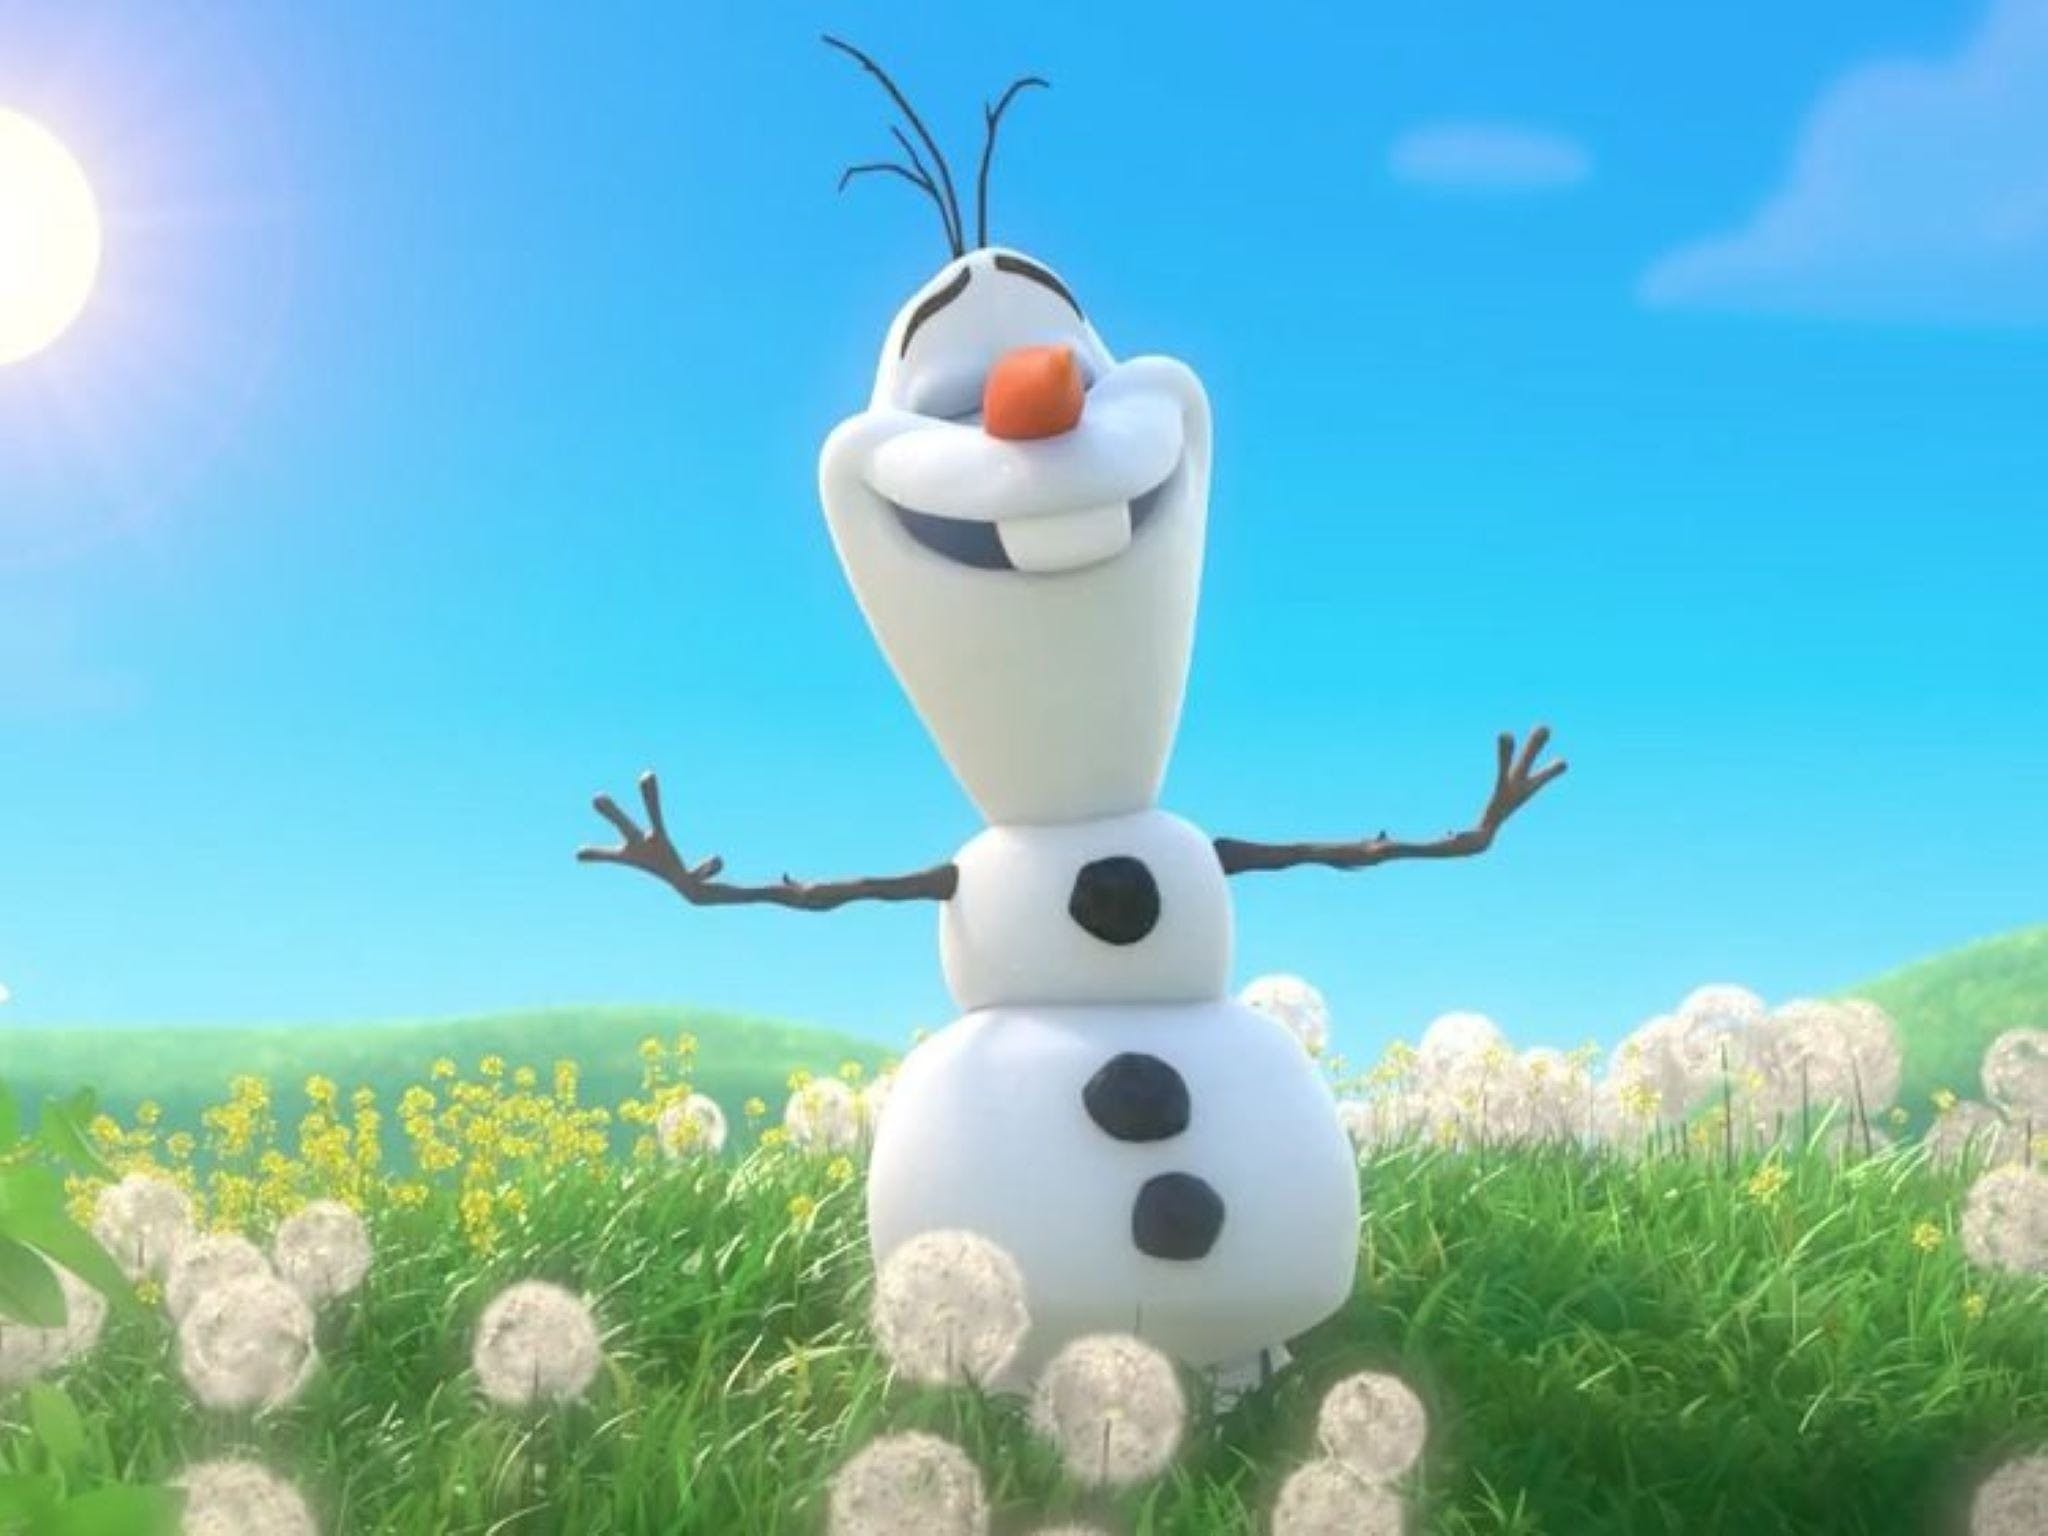 Meet Olaf from Frozen - Casino Accommodation